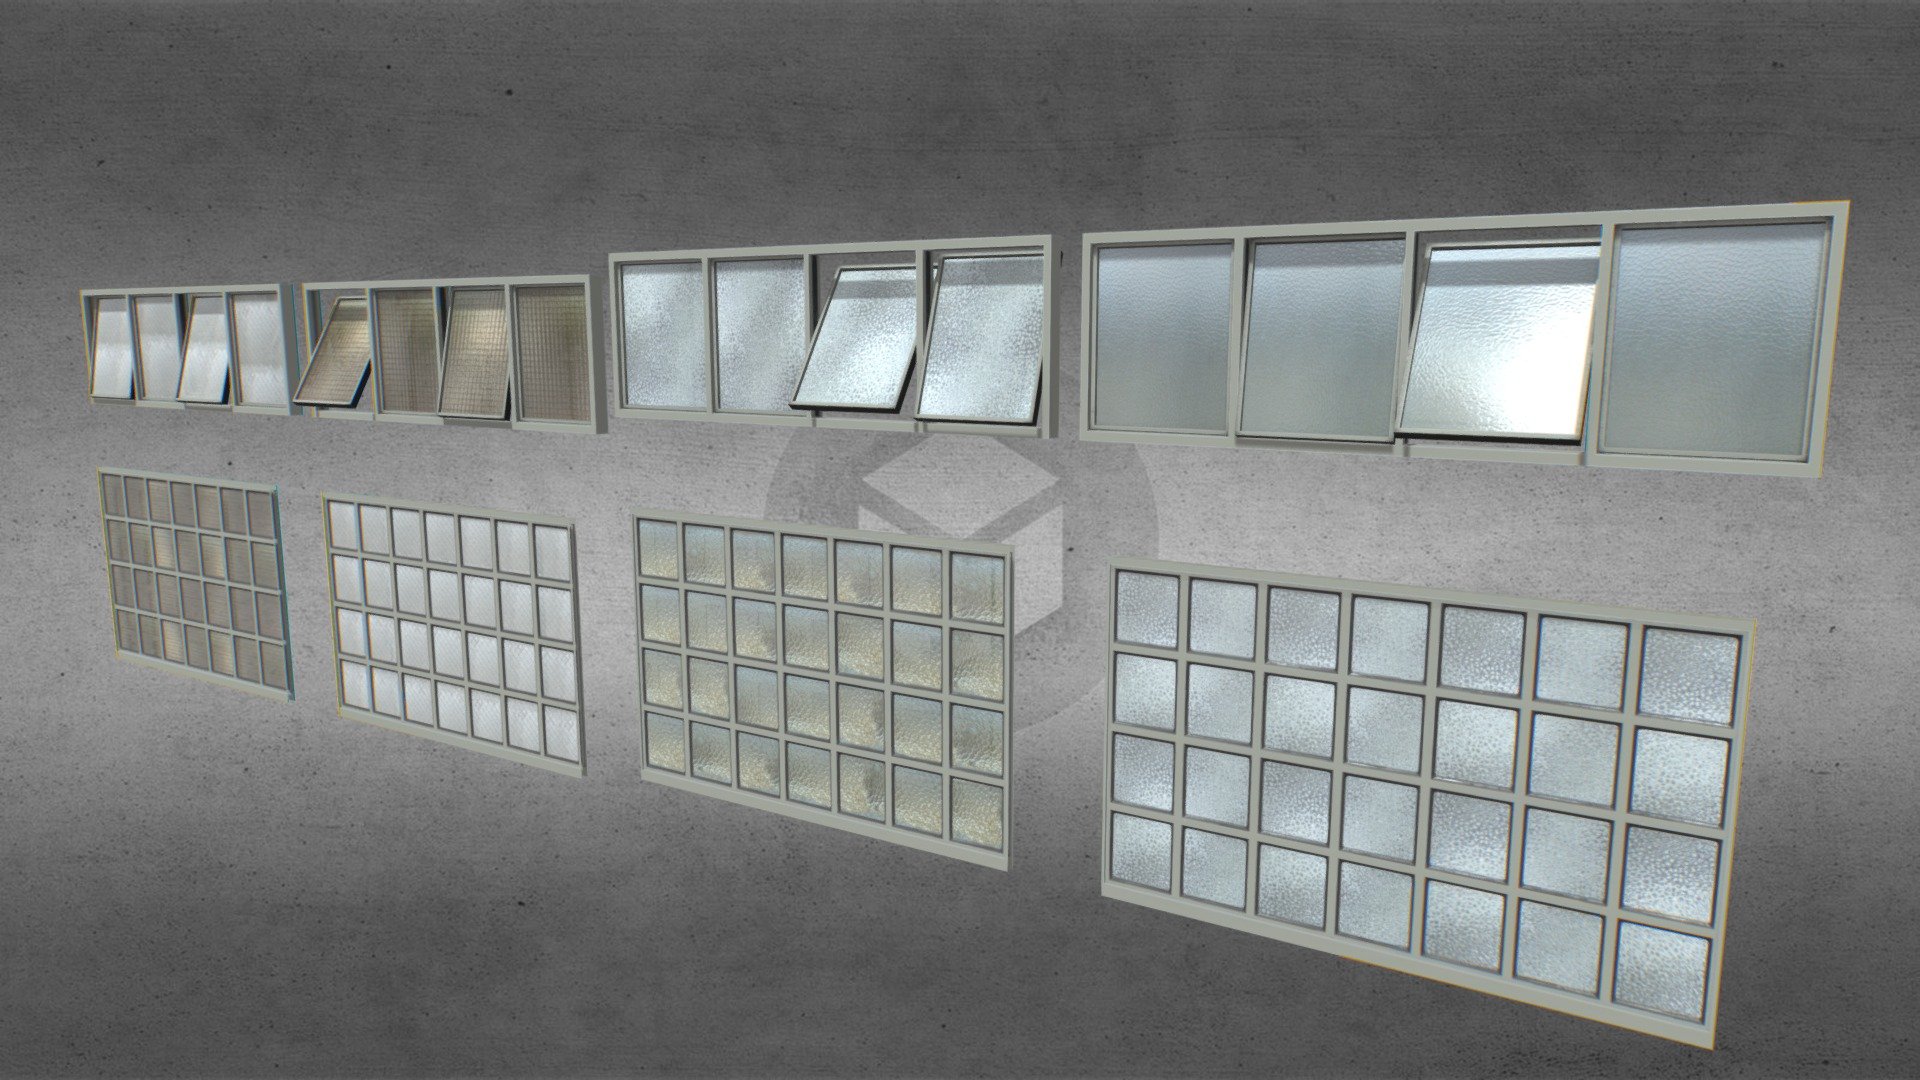 Pack of 4 different windows with painted frame. Based on realistic windows.

Comes with PBR 4096pix texture sets including Albedo, Normal, Roughness, Metalness, AO. TGA textures.

Suitable for factories, warehouses, hangars, etc..

In the window with 4 glasses, the 4 windows can be opened 3d model